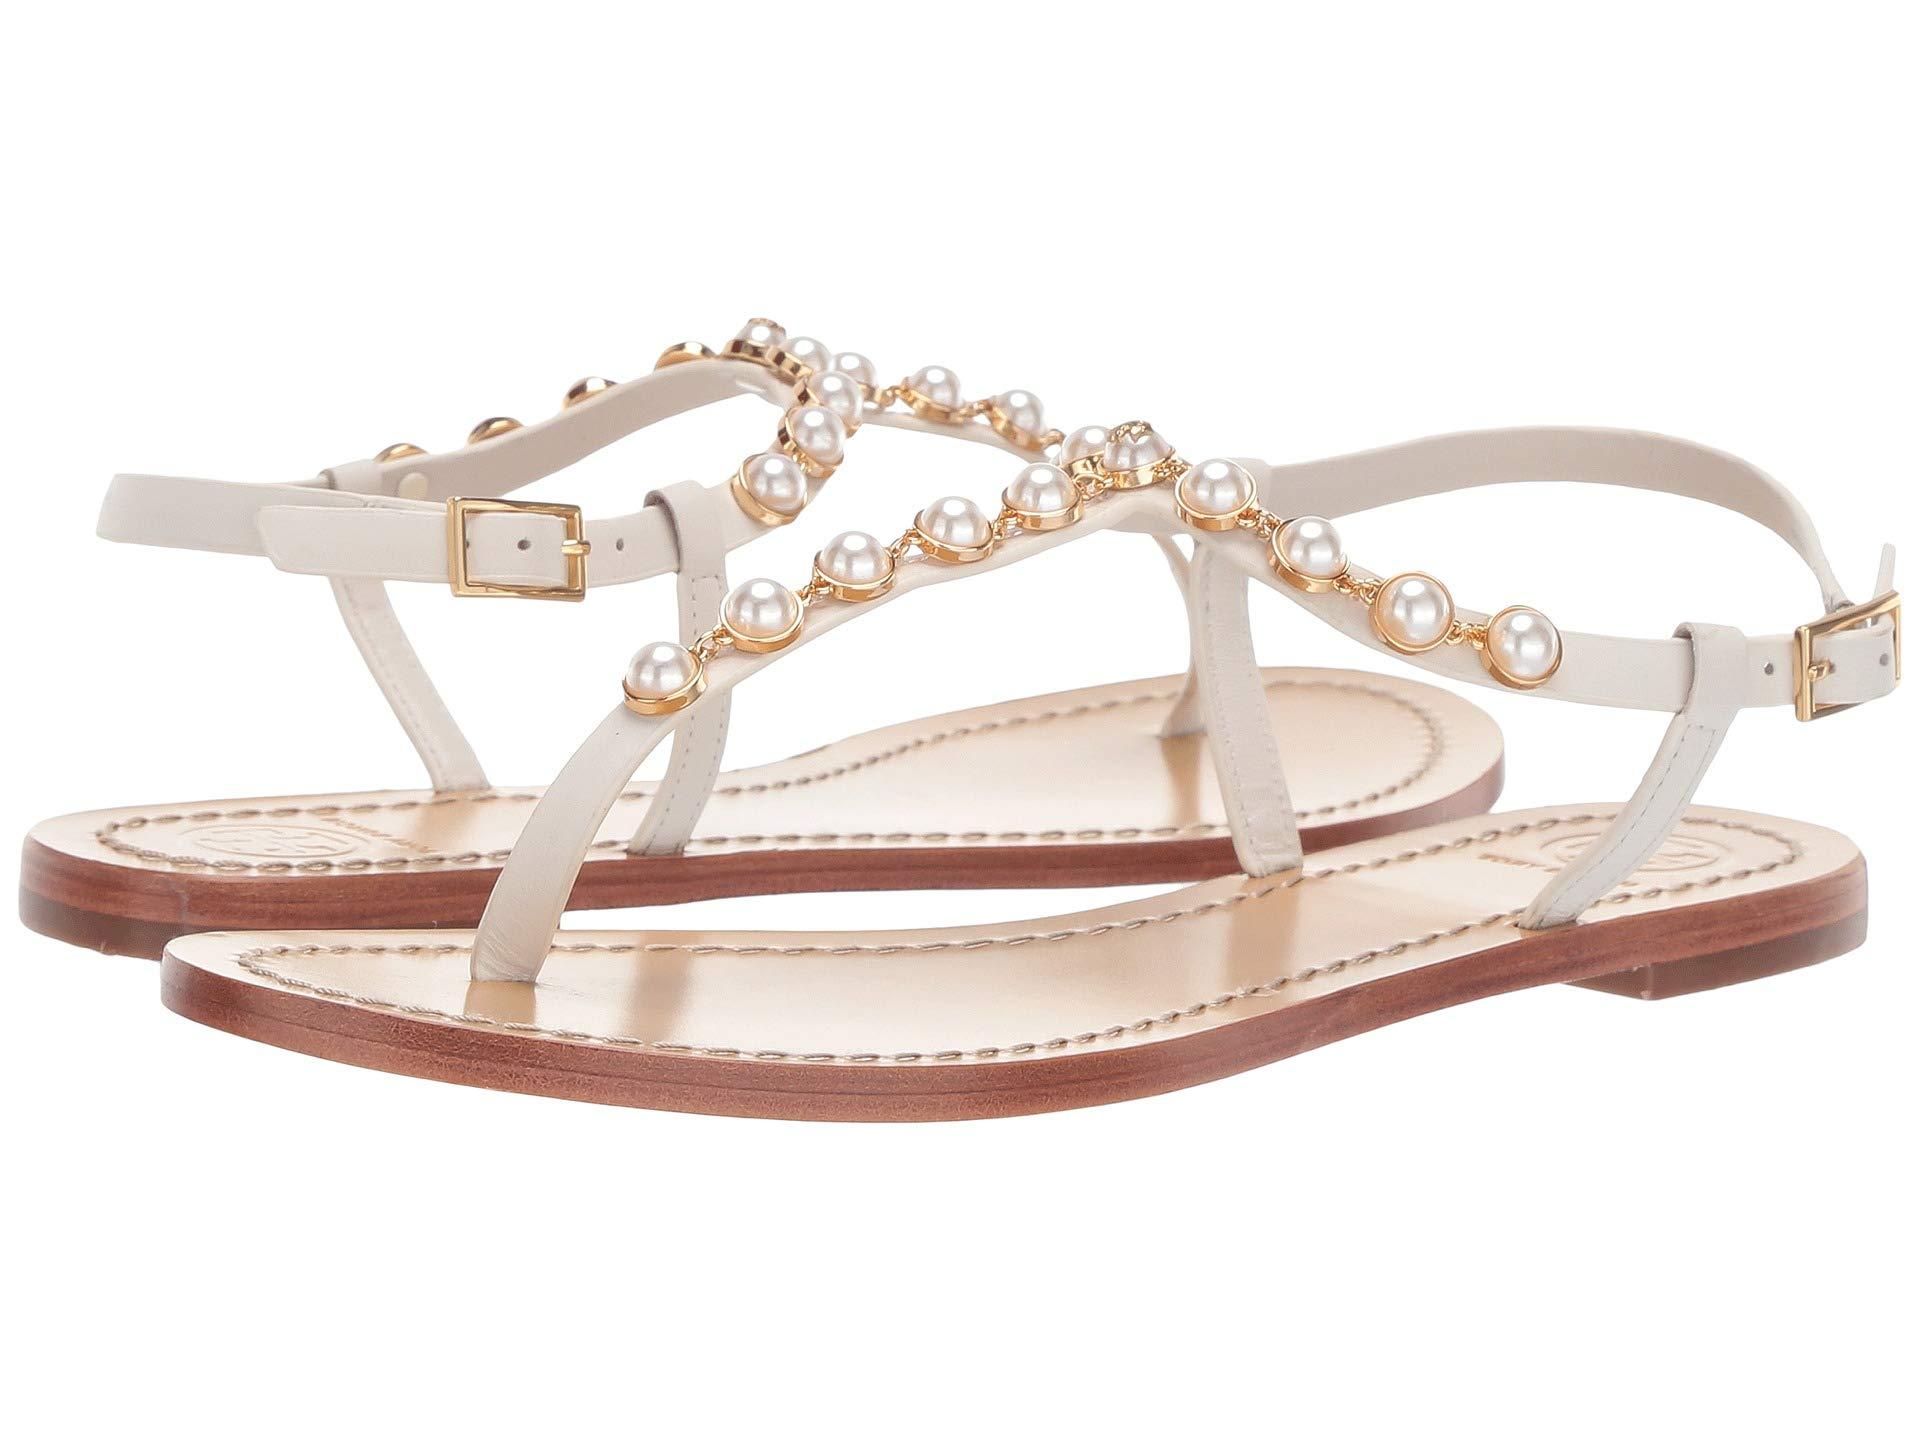 Lyst - Tory Burch Emmy Pearl Sandal (perfect Black) Women's Sandals in ...